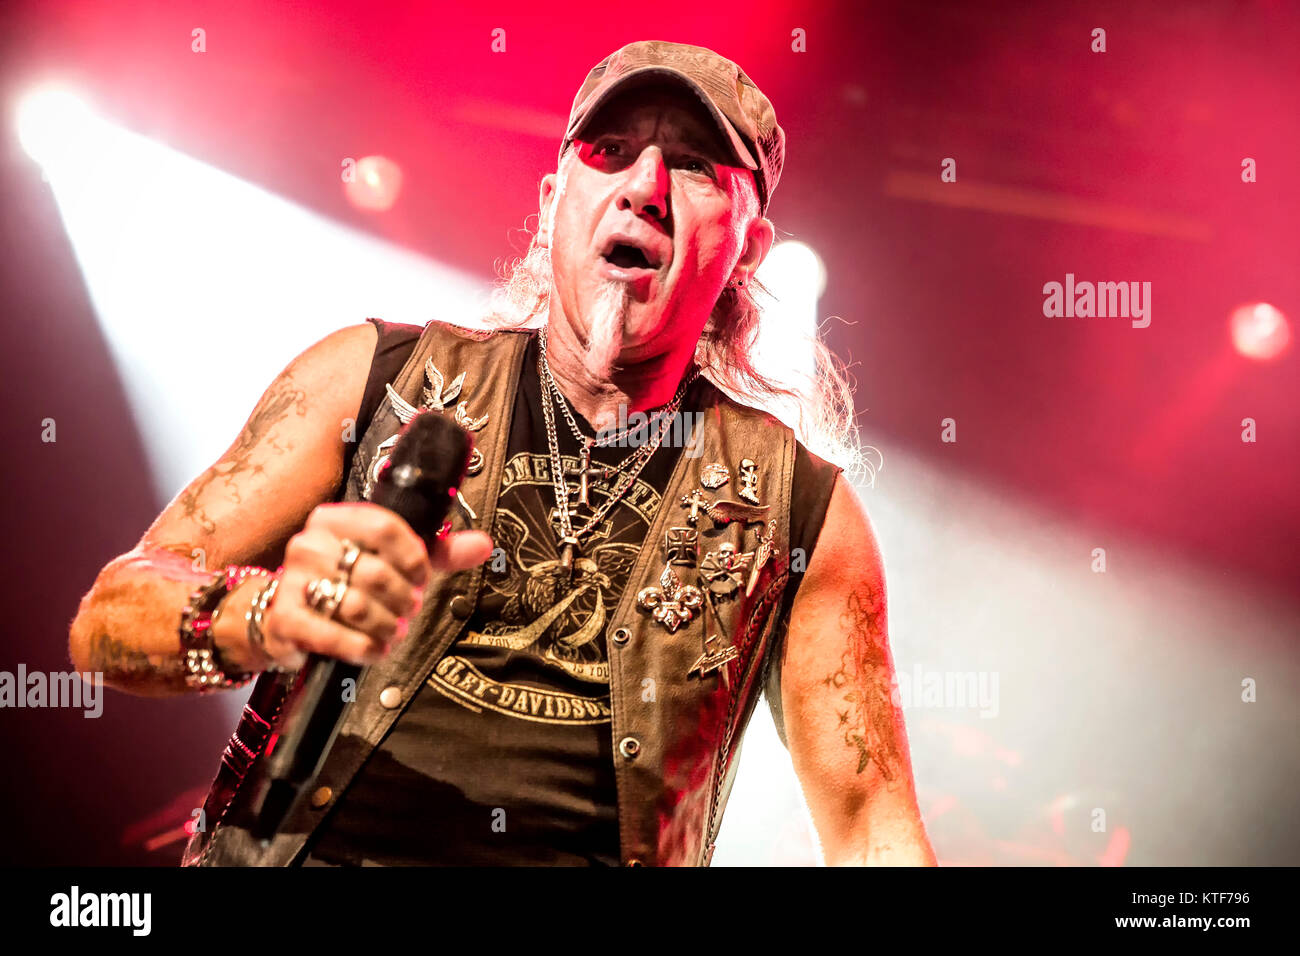 The German heavy metal band Accept performs a live concert at Rockefeller in Oslo. Here vocalist Mark Tornillo is seen live on stage. Norway, 01/10 2014. Stock Photo